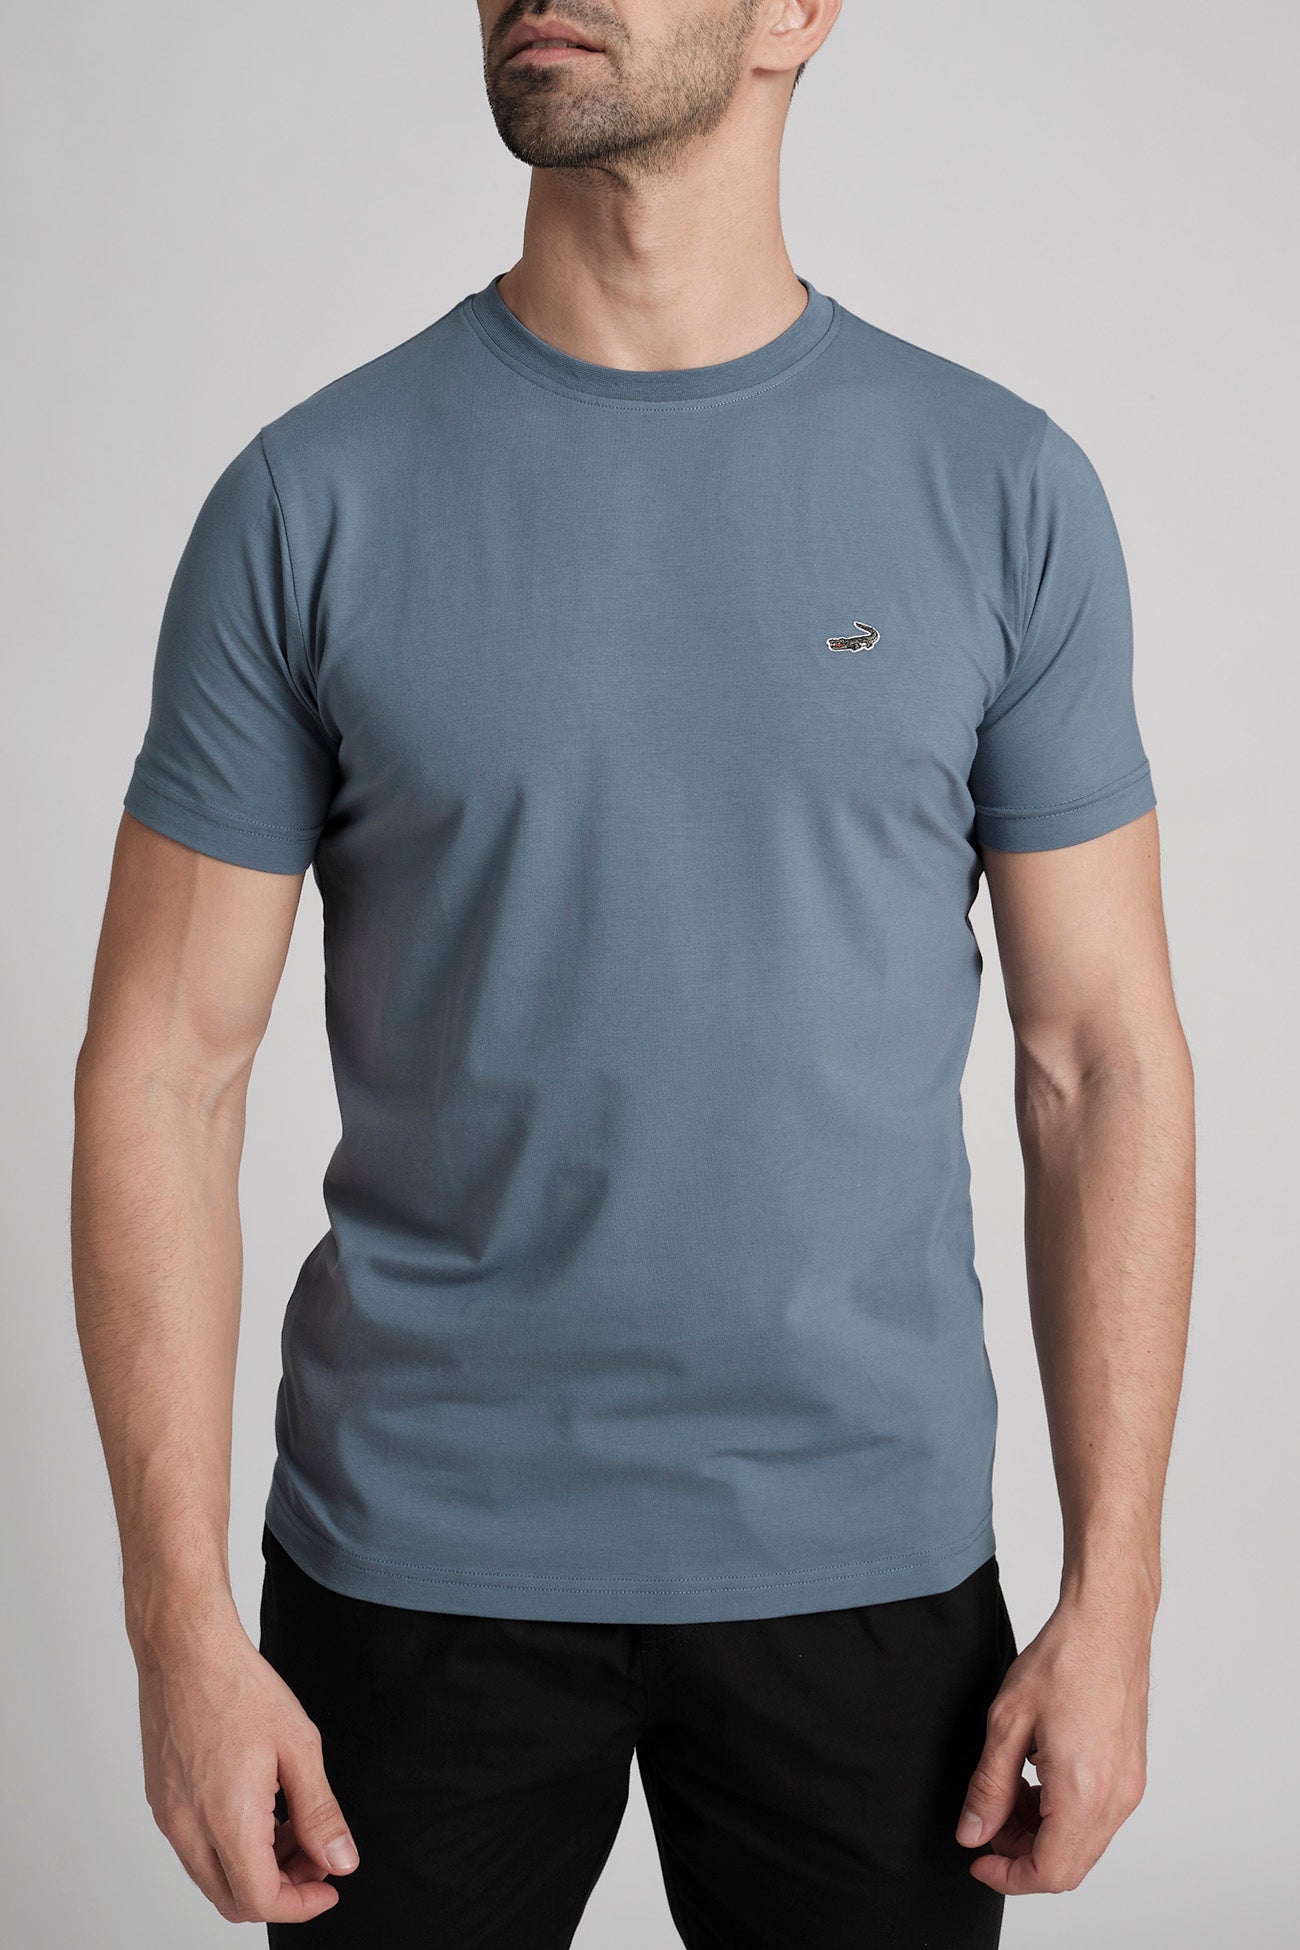 Single Jersey Verve Tee Action Fit - Blue China